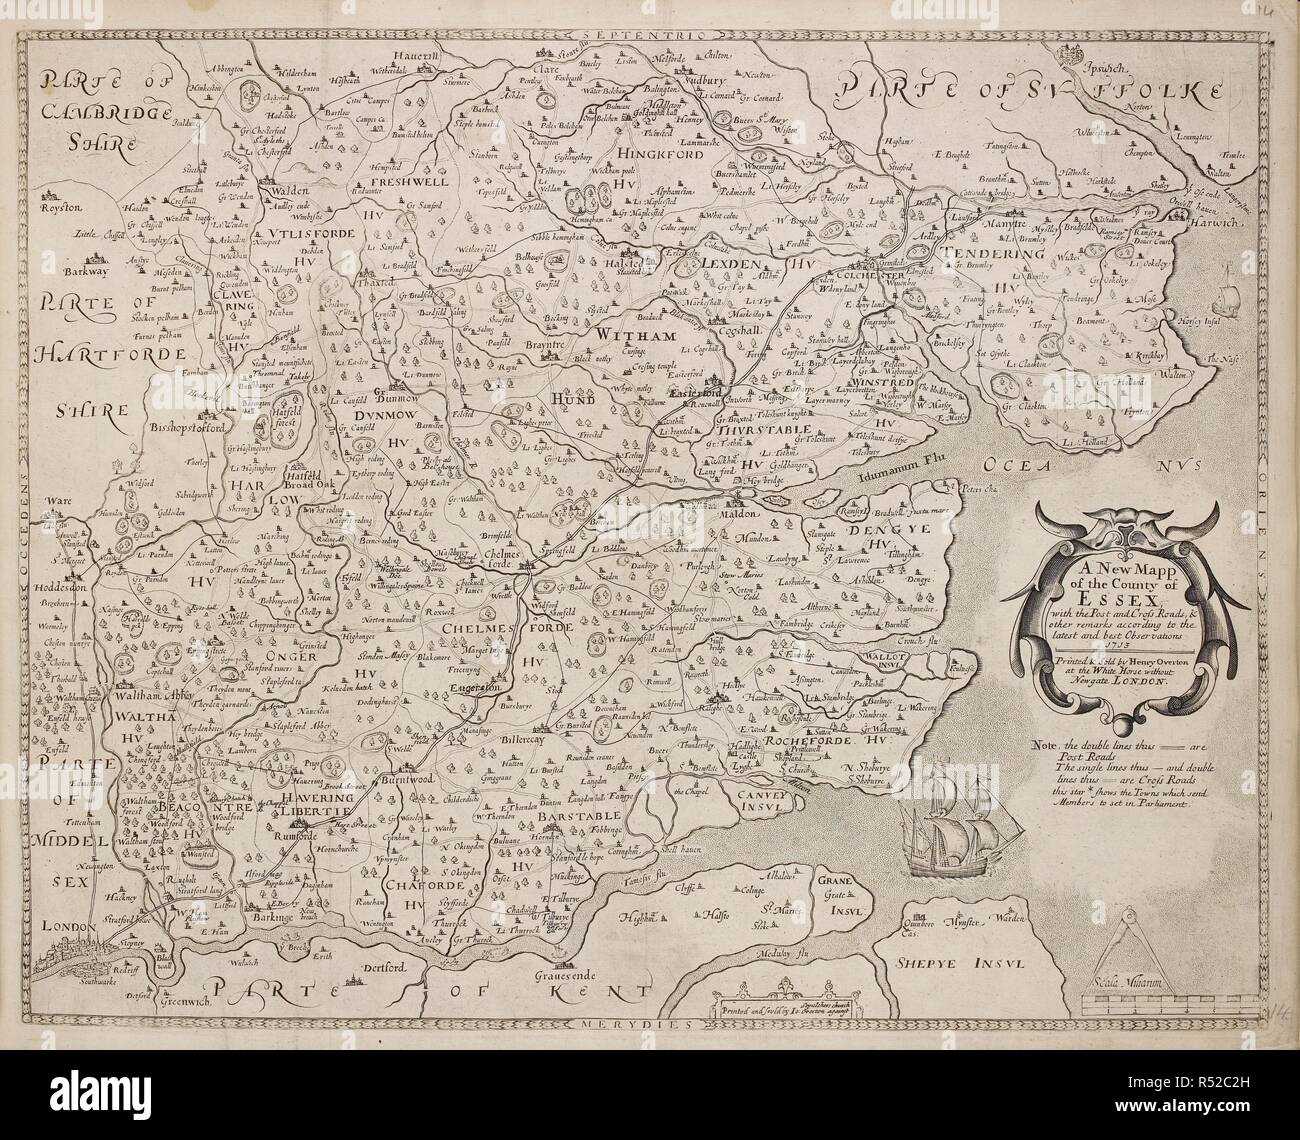 A Map of the county of Essex. A collection of 37 Maps of the counties of England. London. H. Overton, 1714. A collection of 37 Maps of the counties of England, being reprints, of J. Speedâ€™s maps, by Henry Overton, together with those of P. Stent reprinted by John Overton, and maps of Derbyshire and Yorkshire engraved by S. Nicholls. Source: Maps.145.c.9 14. Language: English. Stock Photo